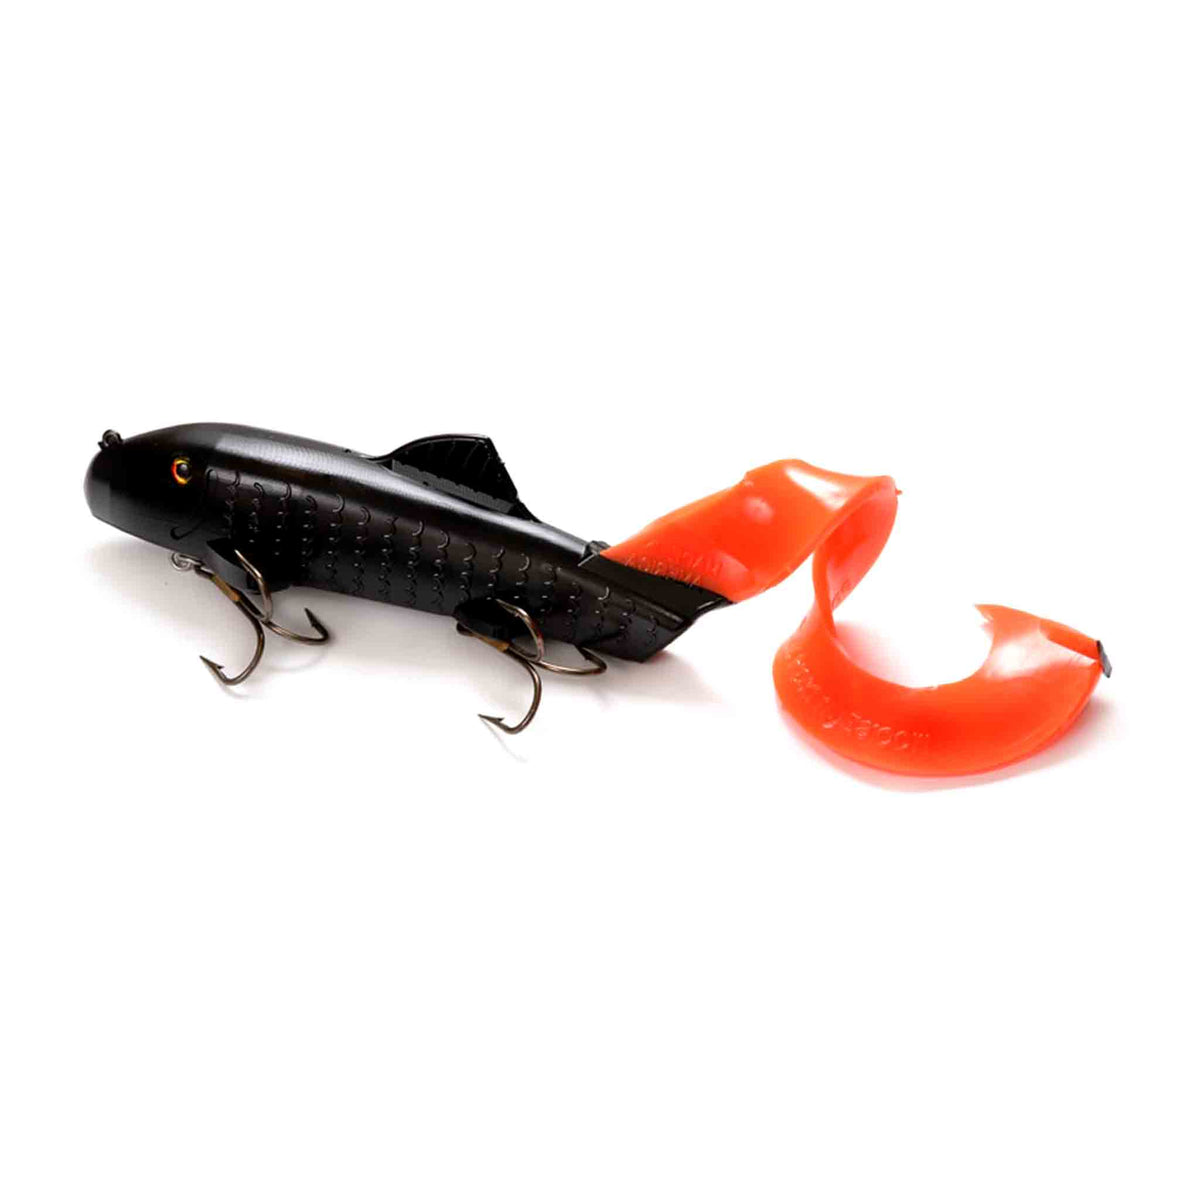 View of Rubber Suick Curly Sue 11" Black Orange Tail available at EZOKO Pike and Musky Shop